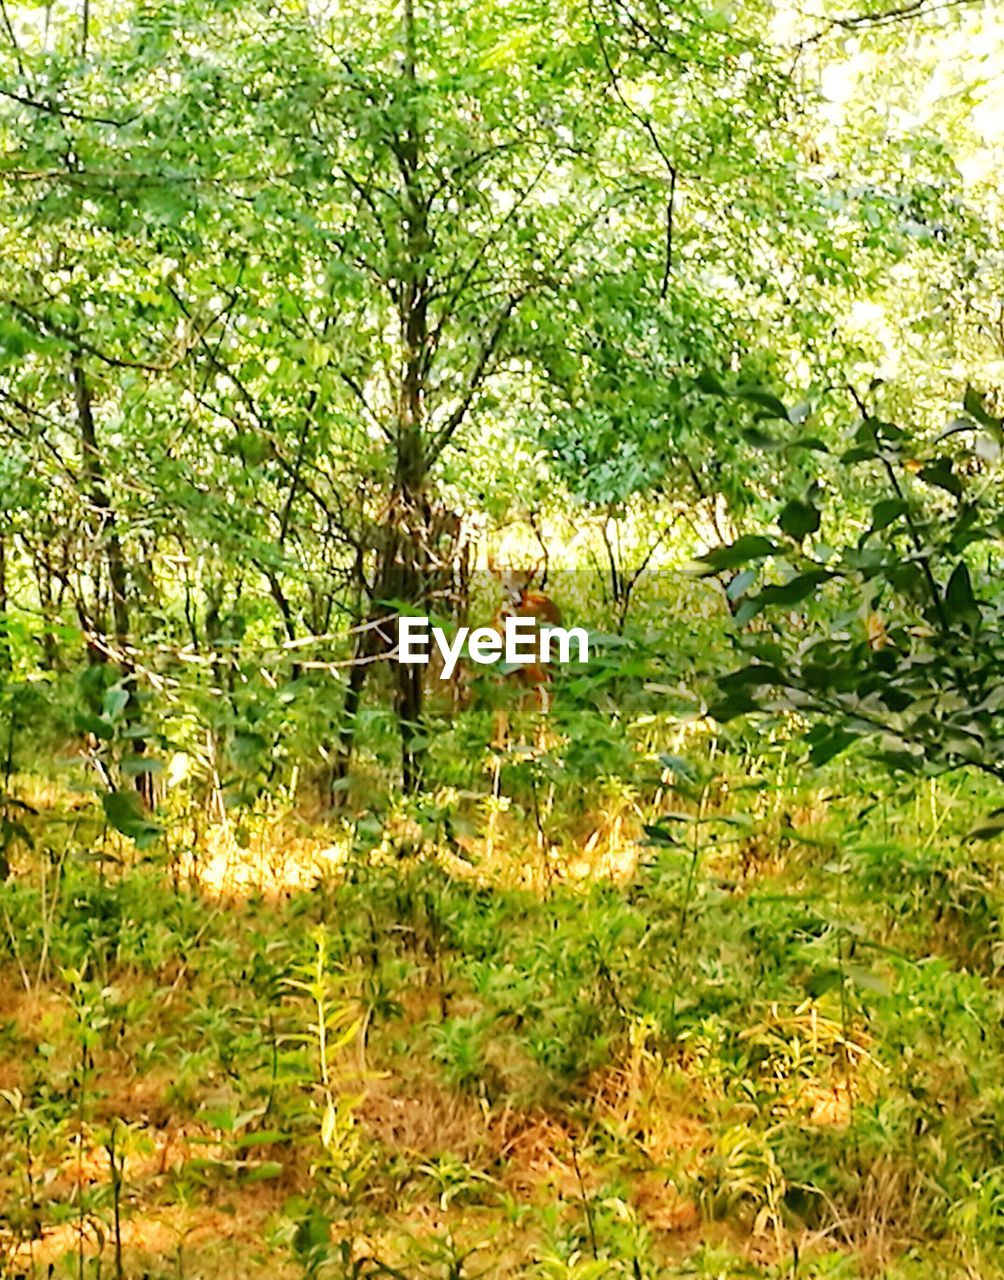 PLANTS AND TREES IN FOREST